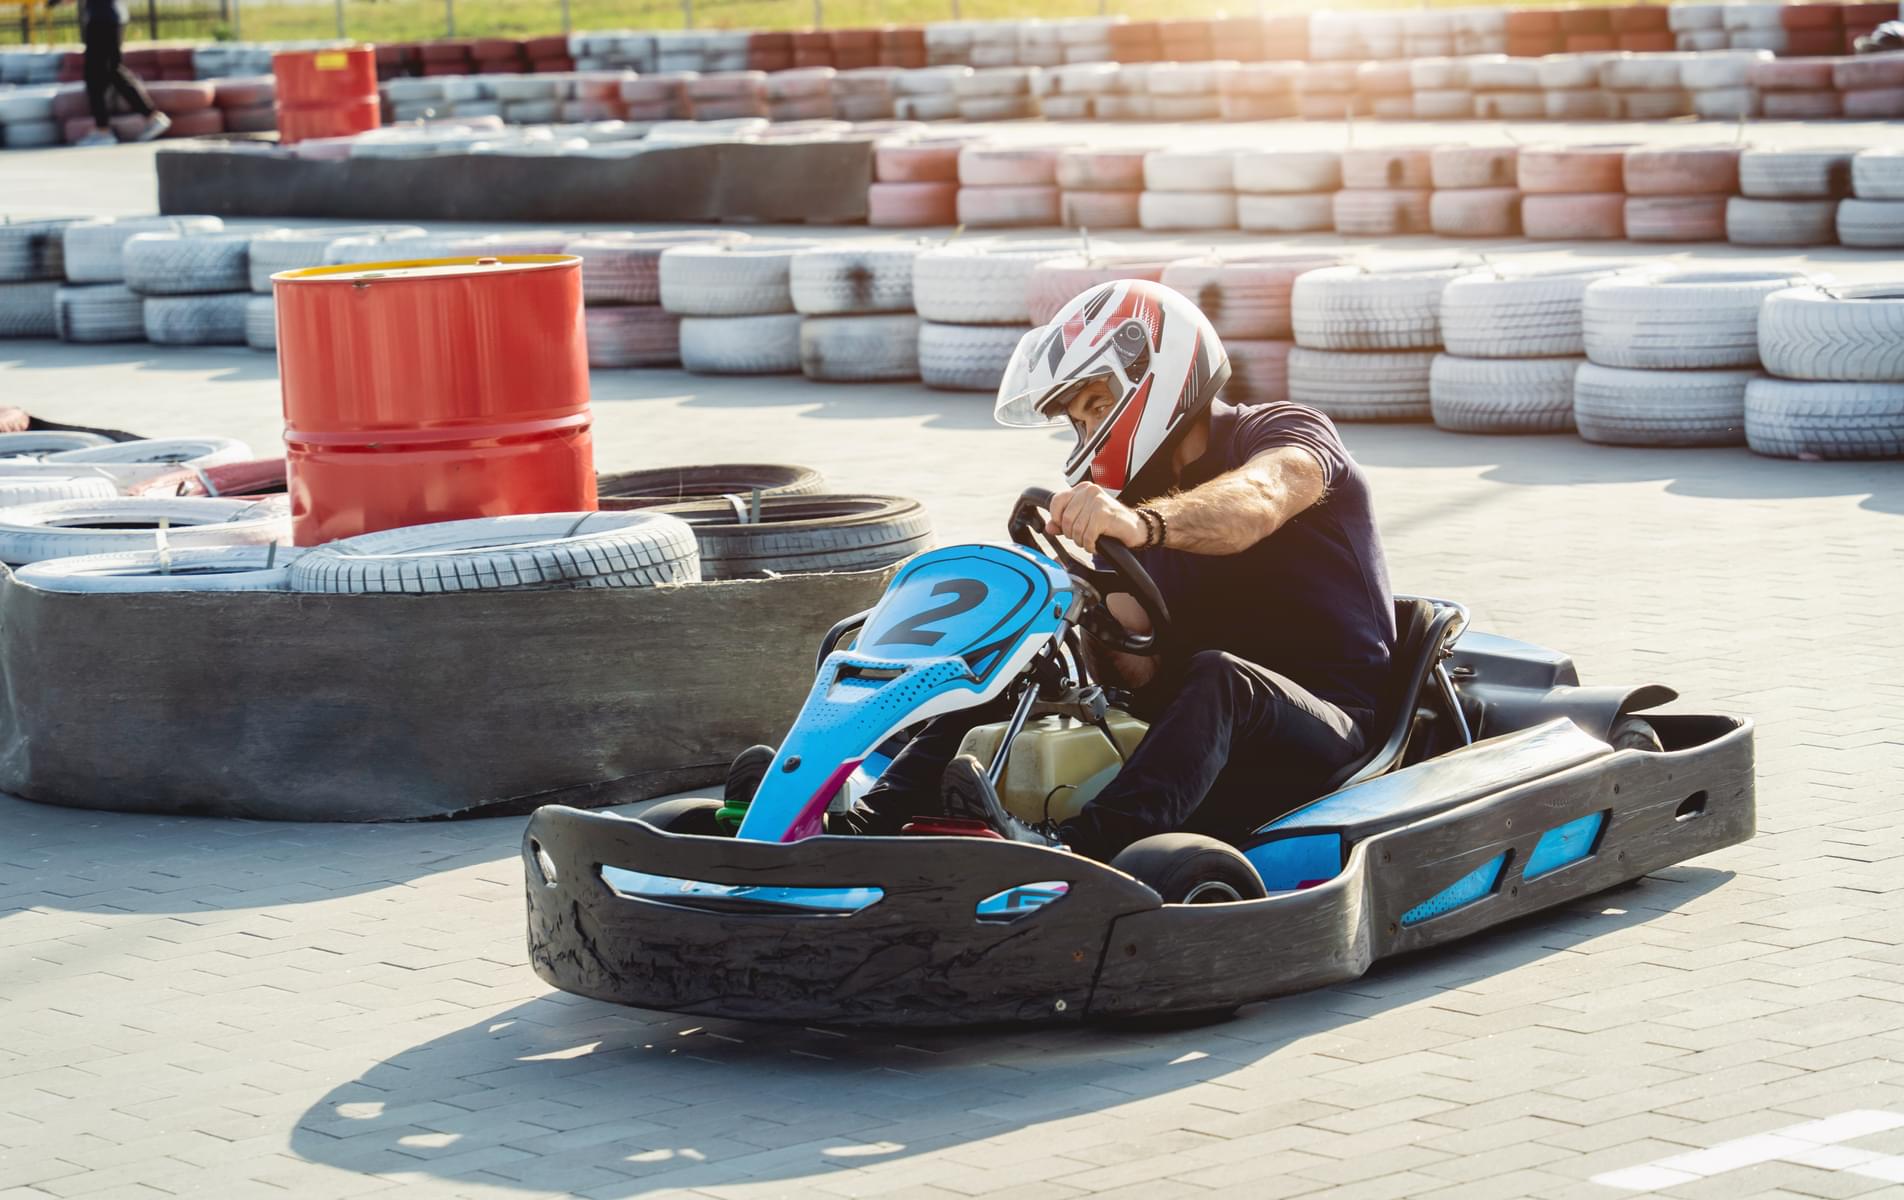 Enjoy a secure and thrilling ride at London's premier go-karting destination.